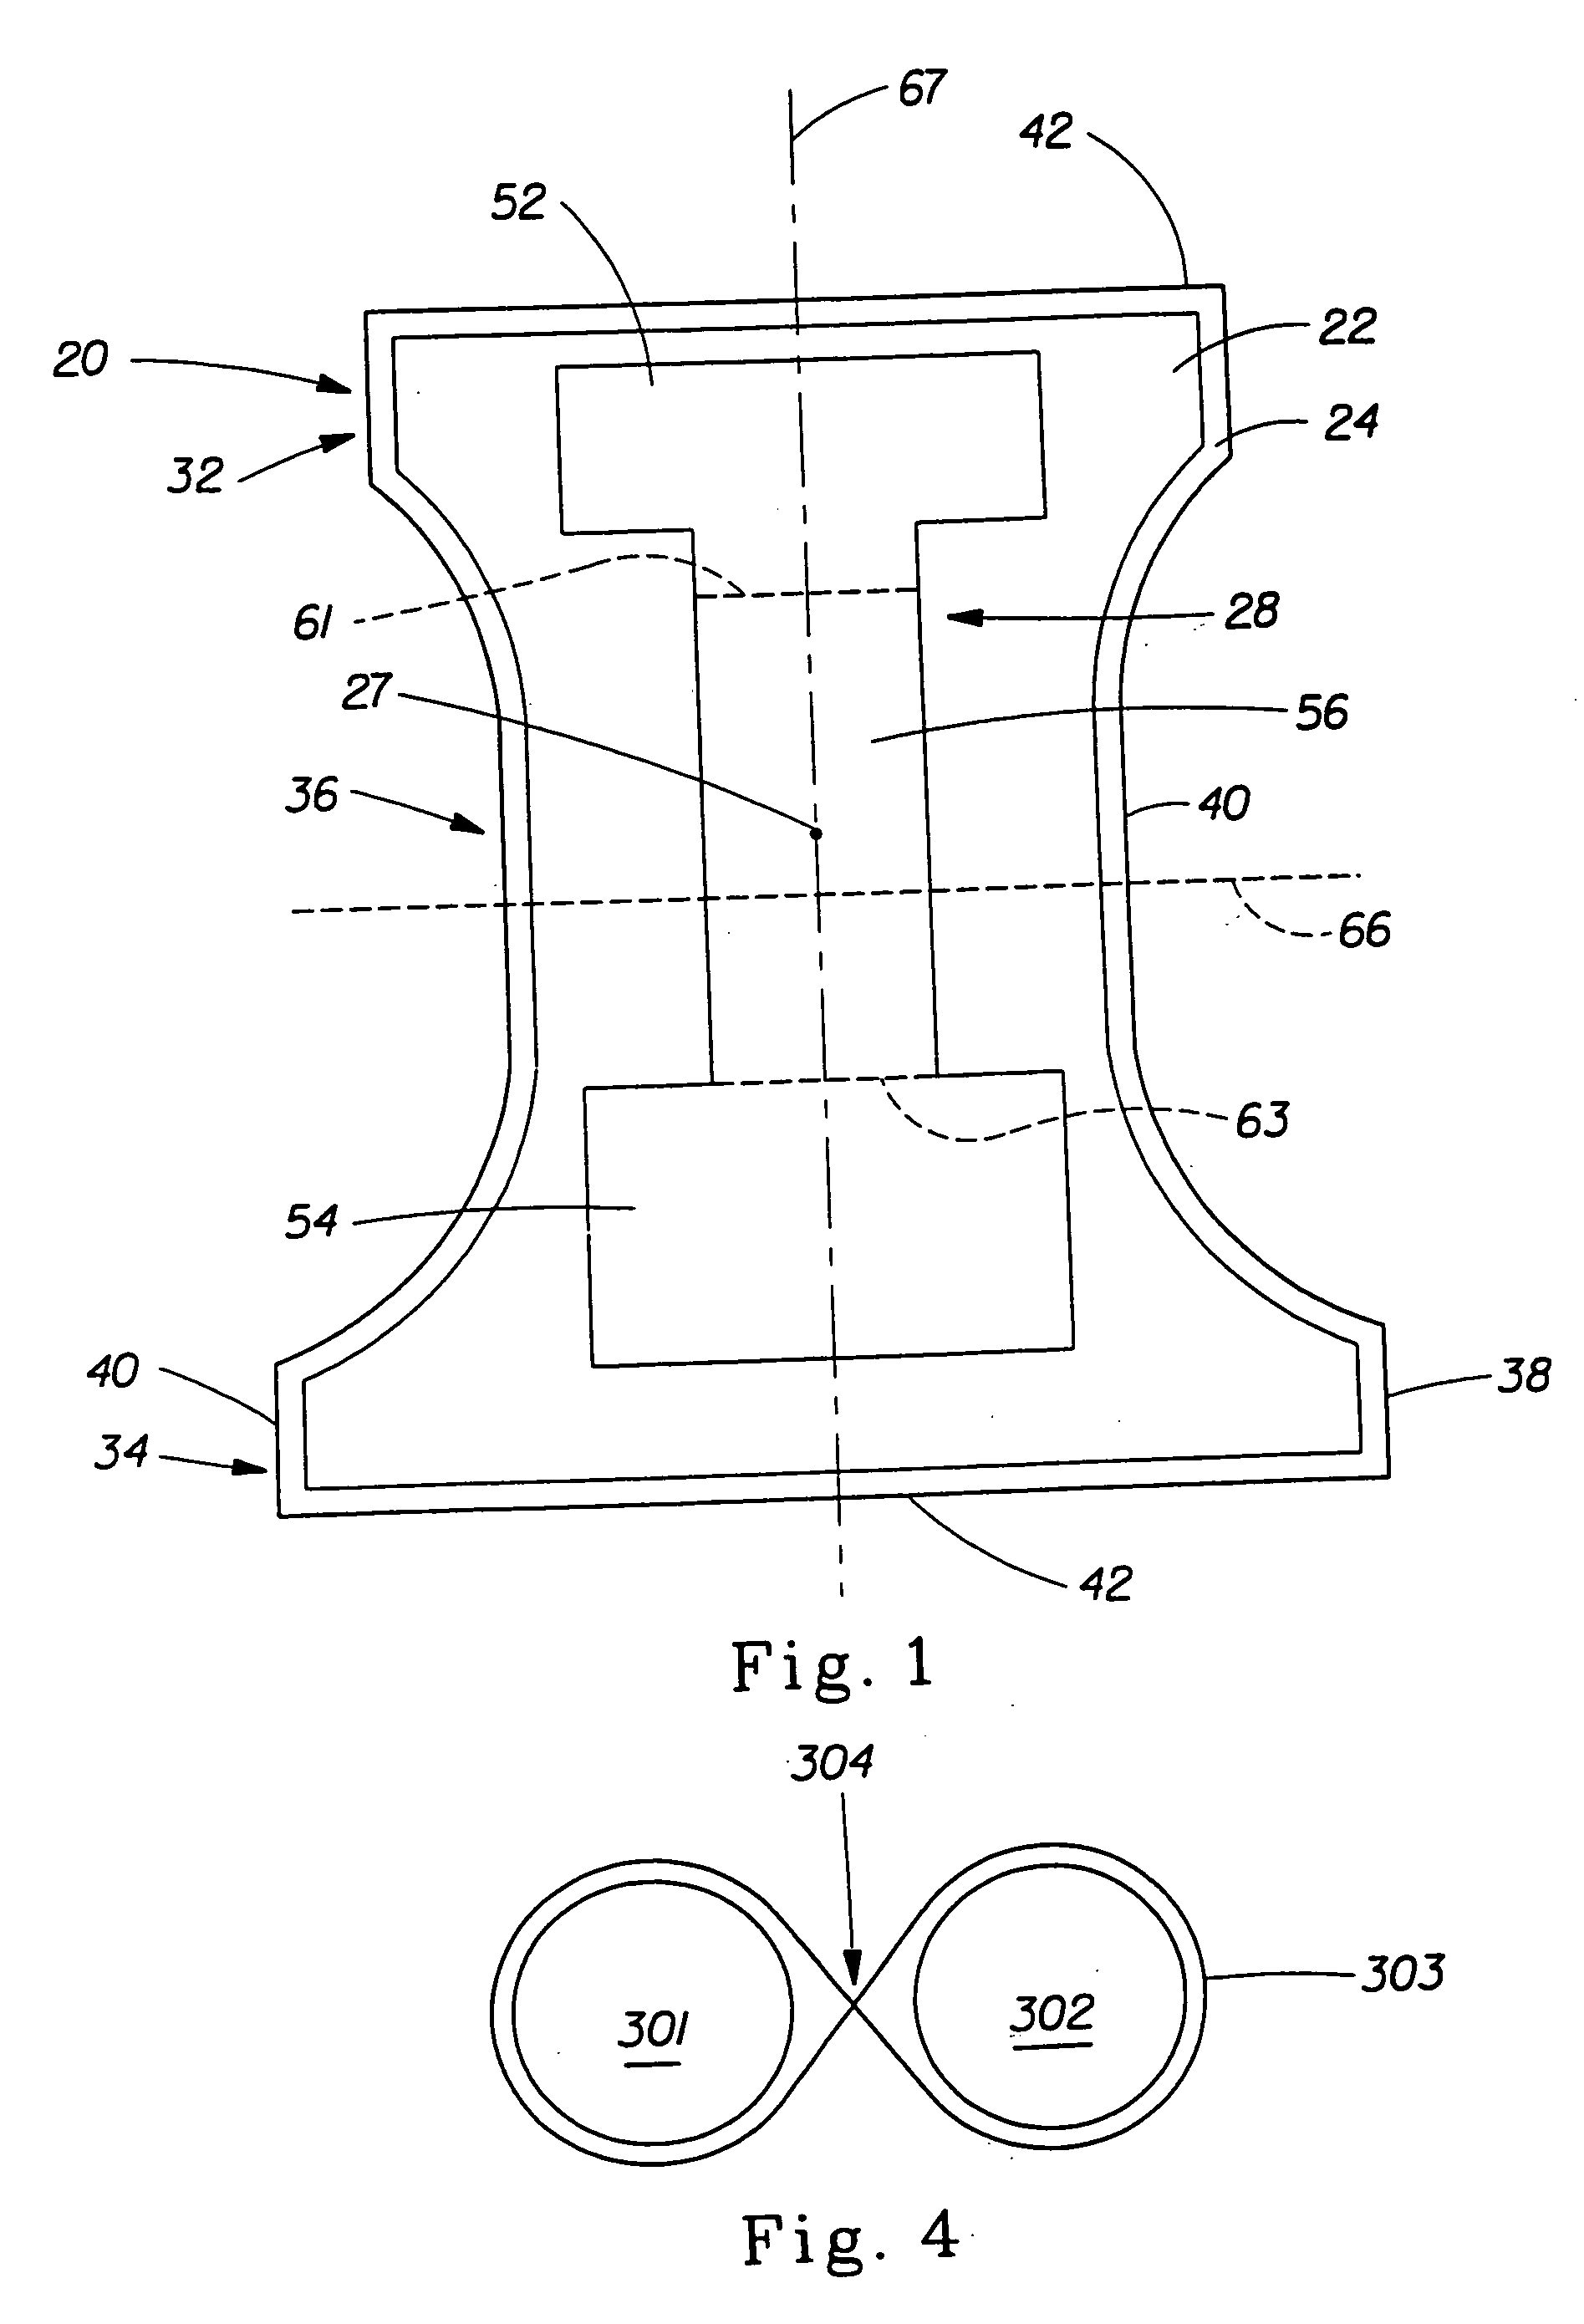 Absorbent article having a replaceable absorbent core component having an insertion pocket